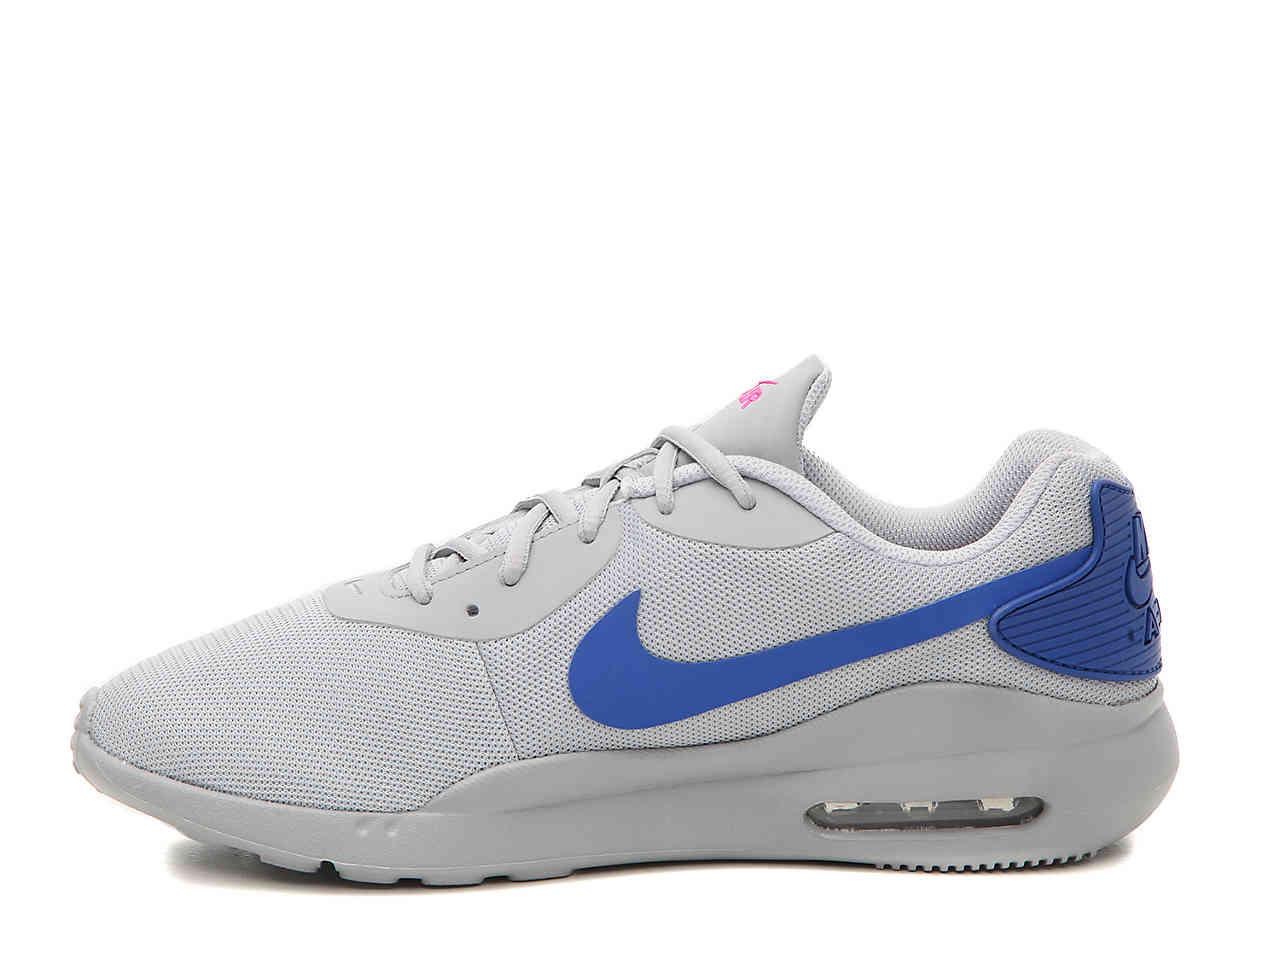 Nike Synthetic Air Max Oketo Sneaker in Grey/Blue/Pink (Blue) for Men - Lyst